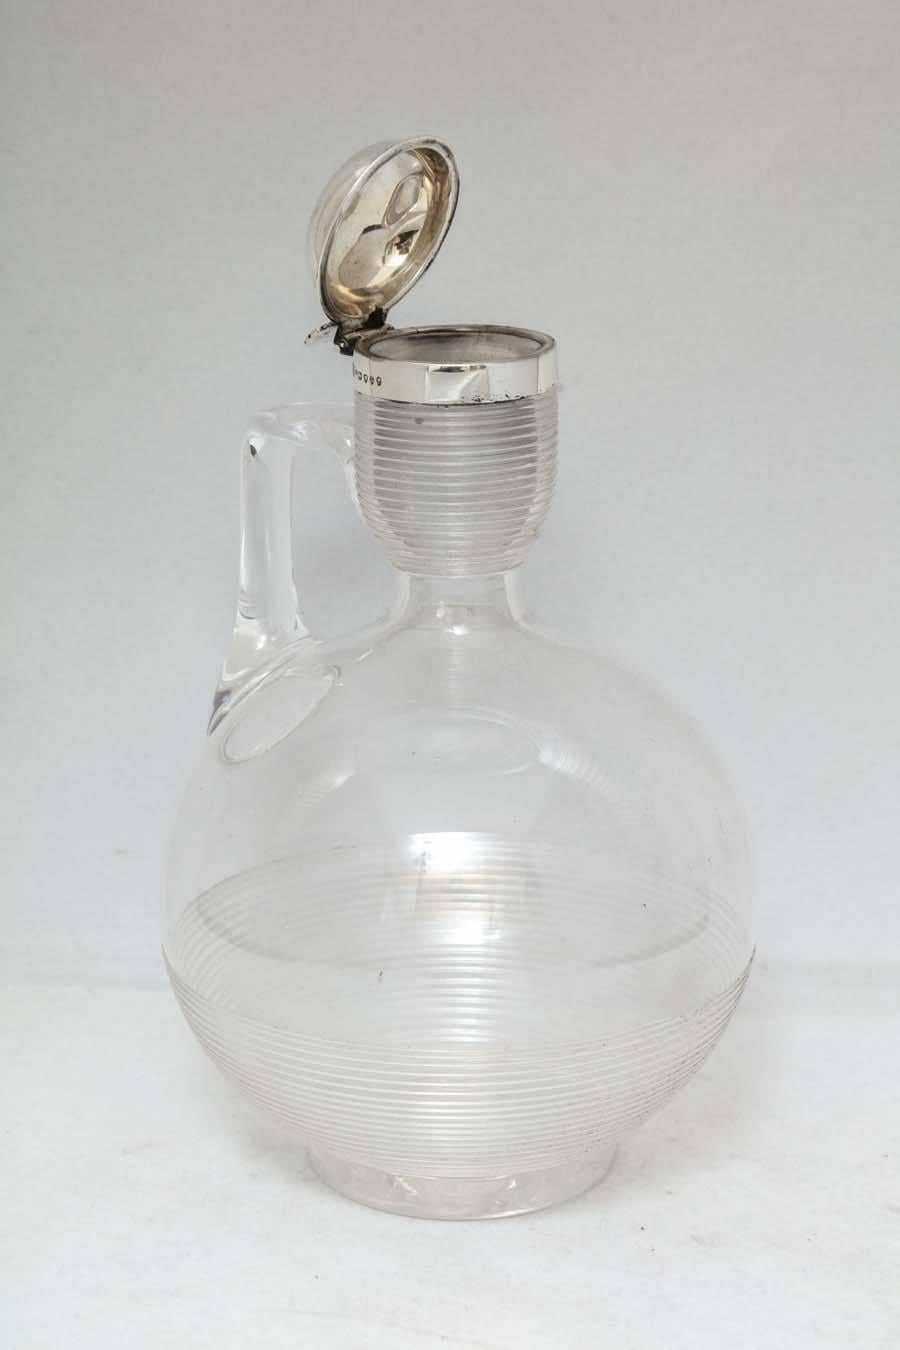 Blown Glass Unusual Victorian Sterling Silver-Mounted Threaded Glass Claret Jug